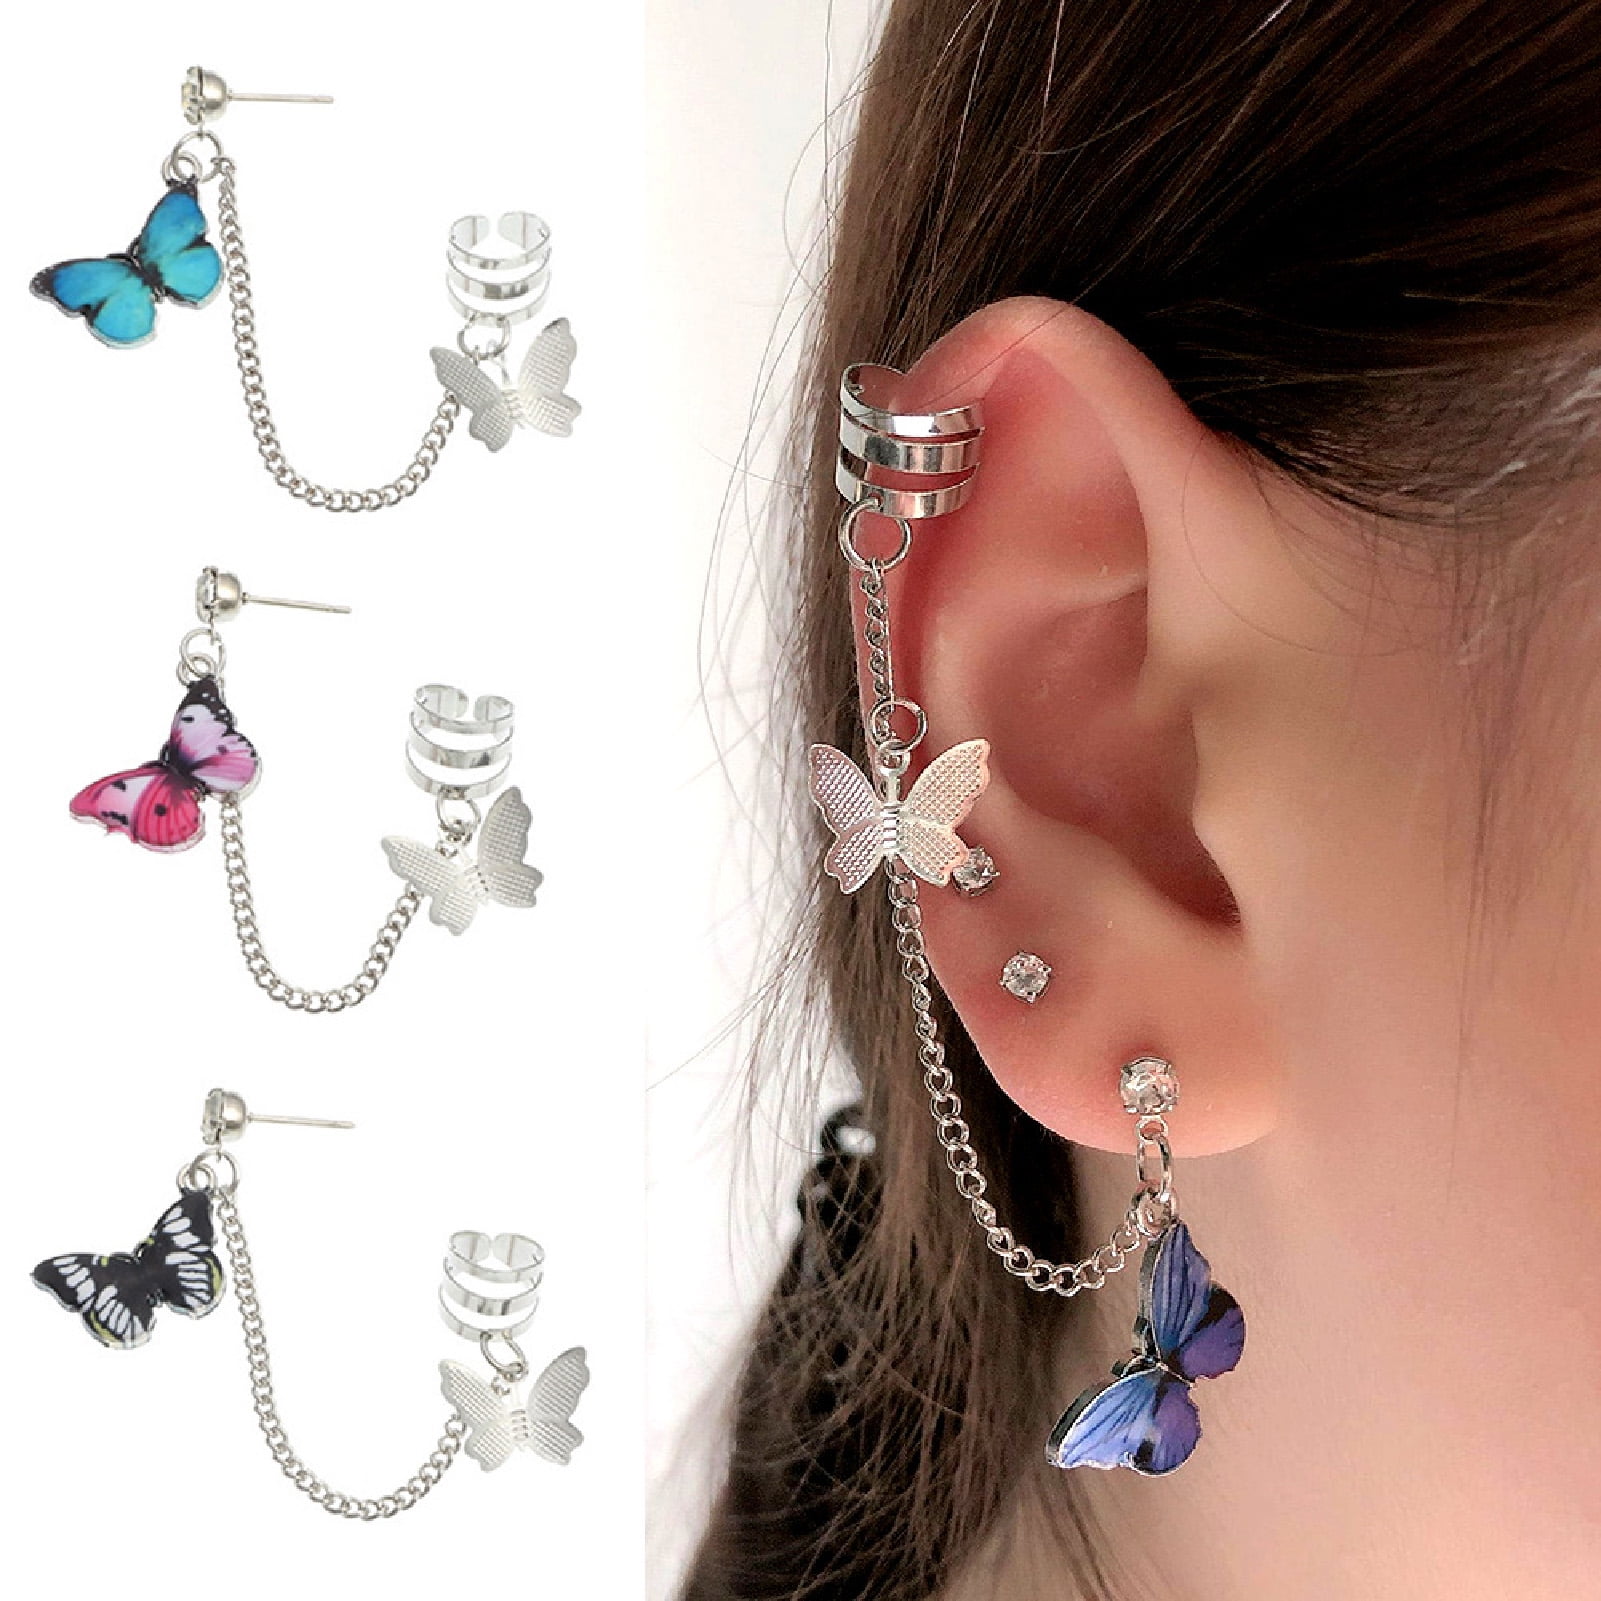 Ear Charms Delicate Leaf Flower and CZ Rhodium on Silver Long Wave Ear Cuff Earring Wraps